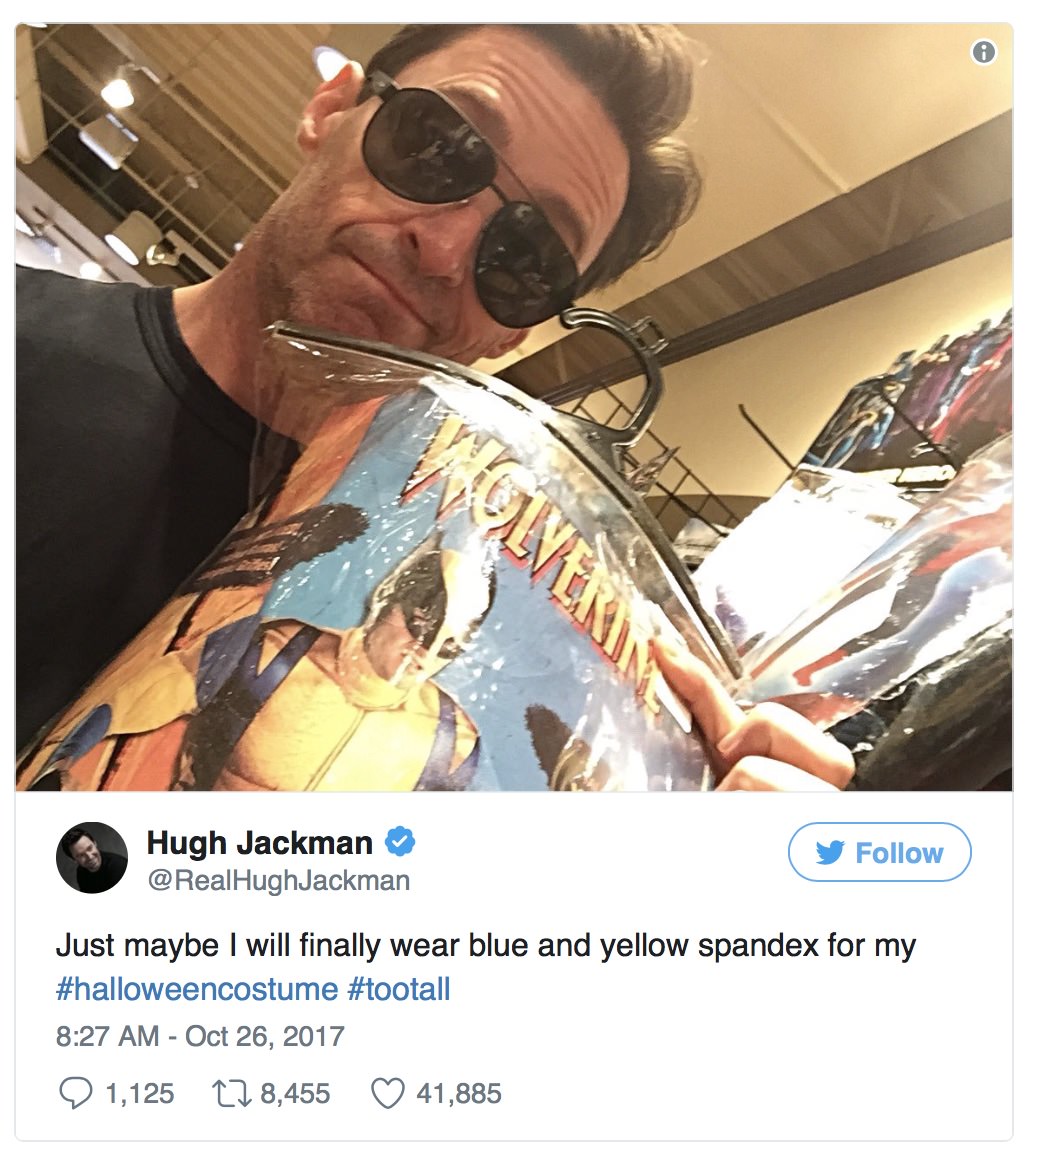 hugh jackman wolverine costume - Hugh Jackman Just maybe I will finally wear blue and yellow spandex for my 9 1,125 228,455 41,885